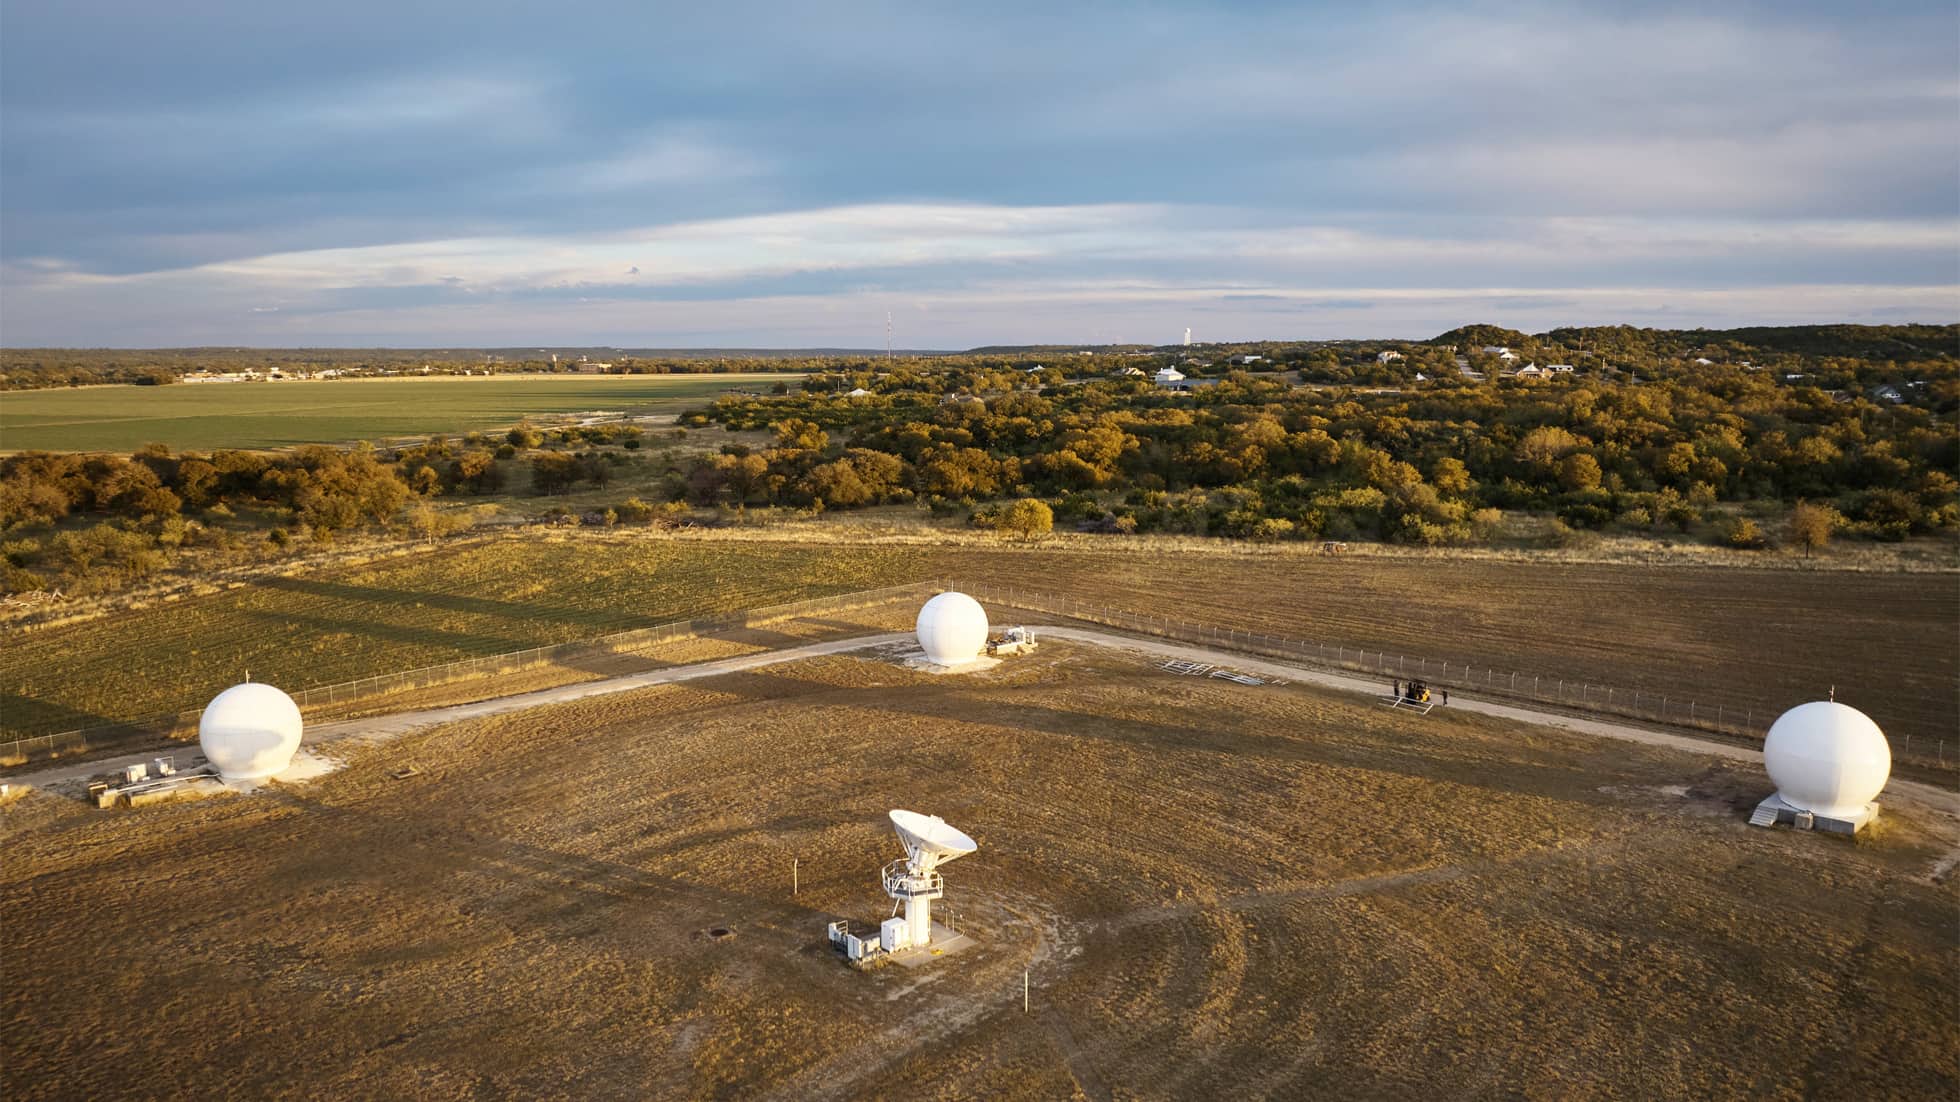 Aerial view of Globalstar's ground stations for satellite communications